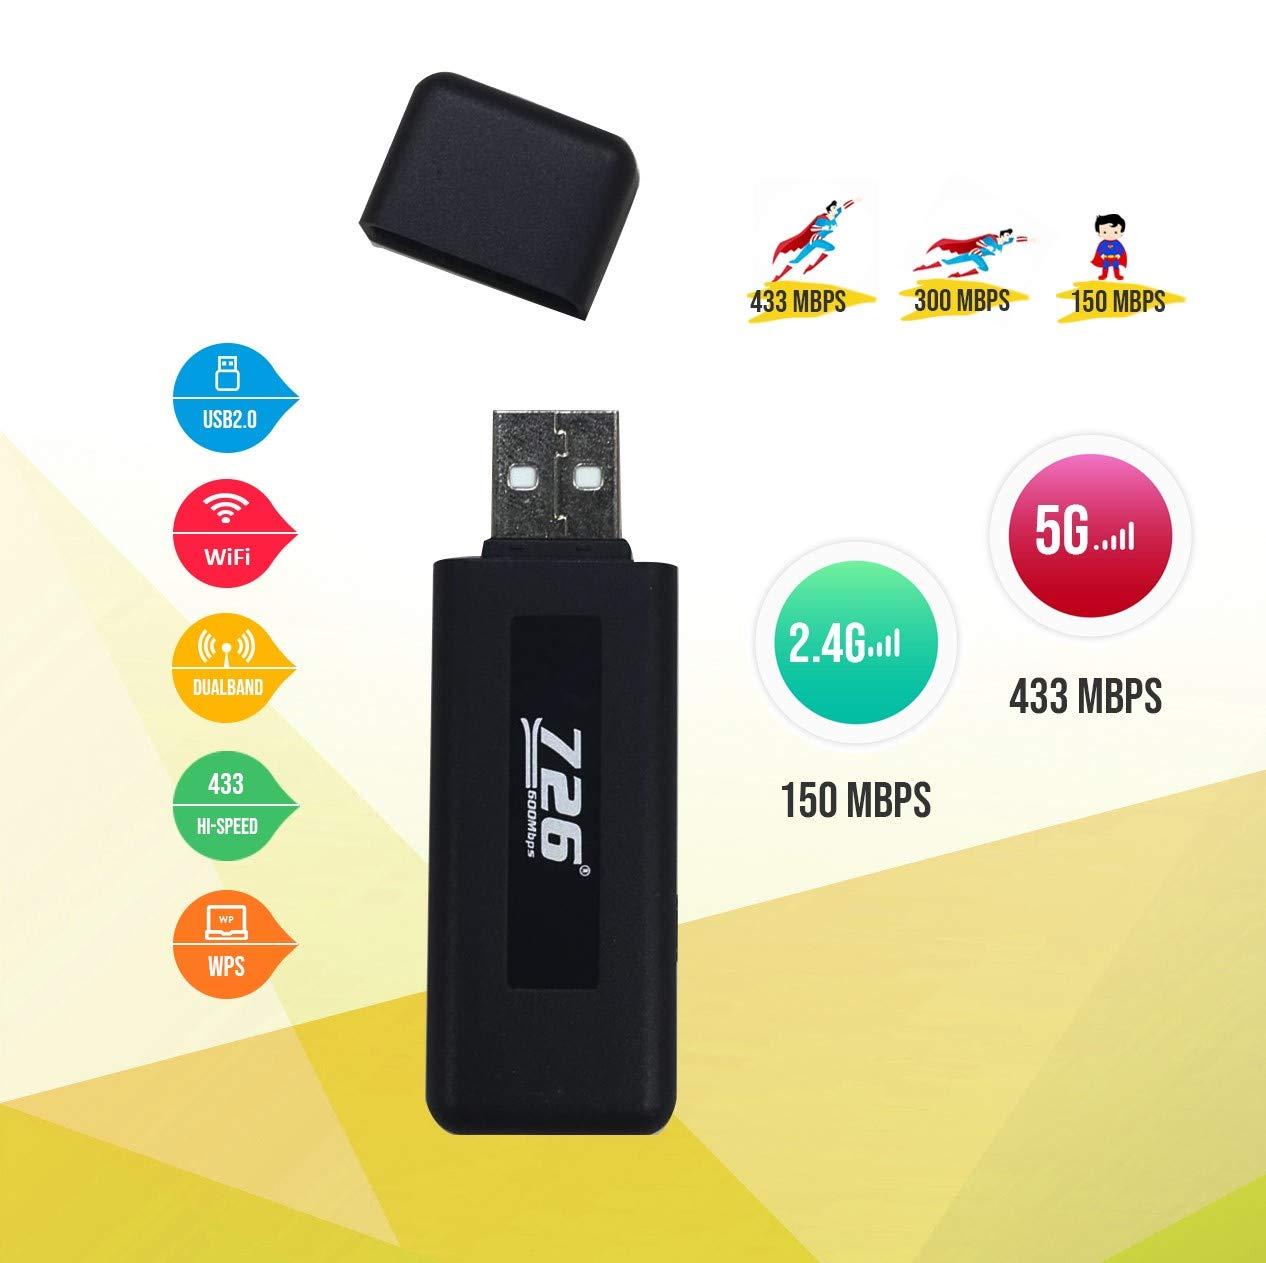 MAG-W600: WiFi Adapter 600Mbps WiFi Dongle Mini Dual Band 2.4G/5G USB Wireless Network Adapter for informir MAG